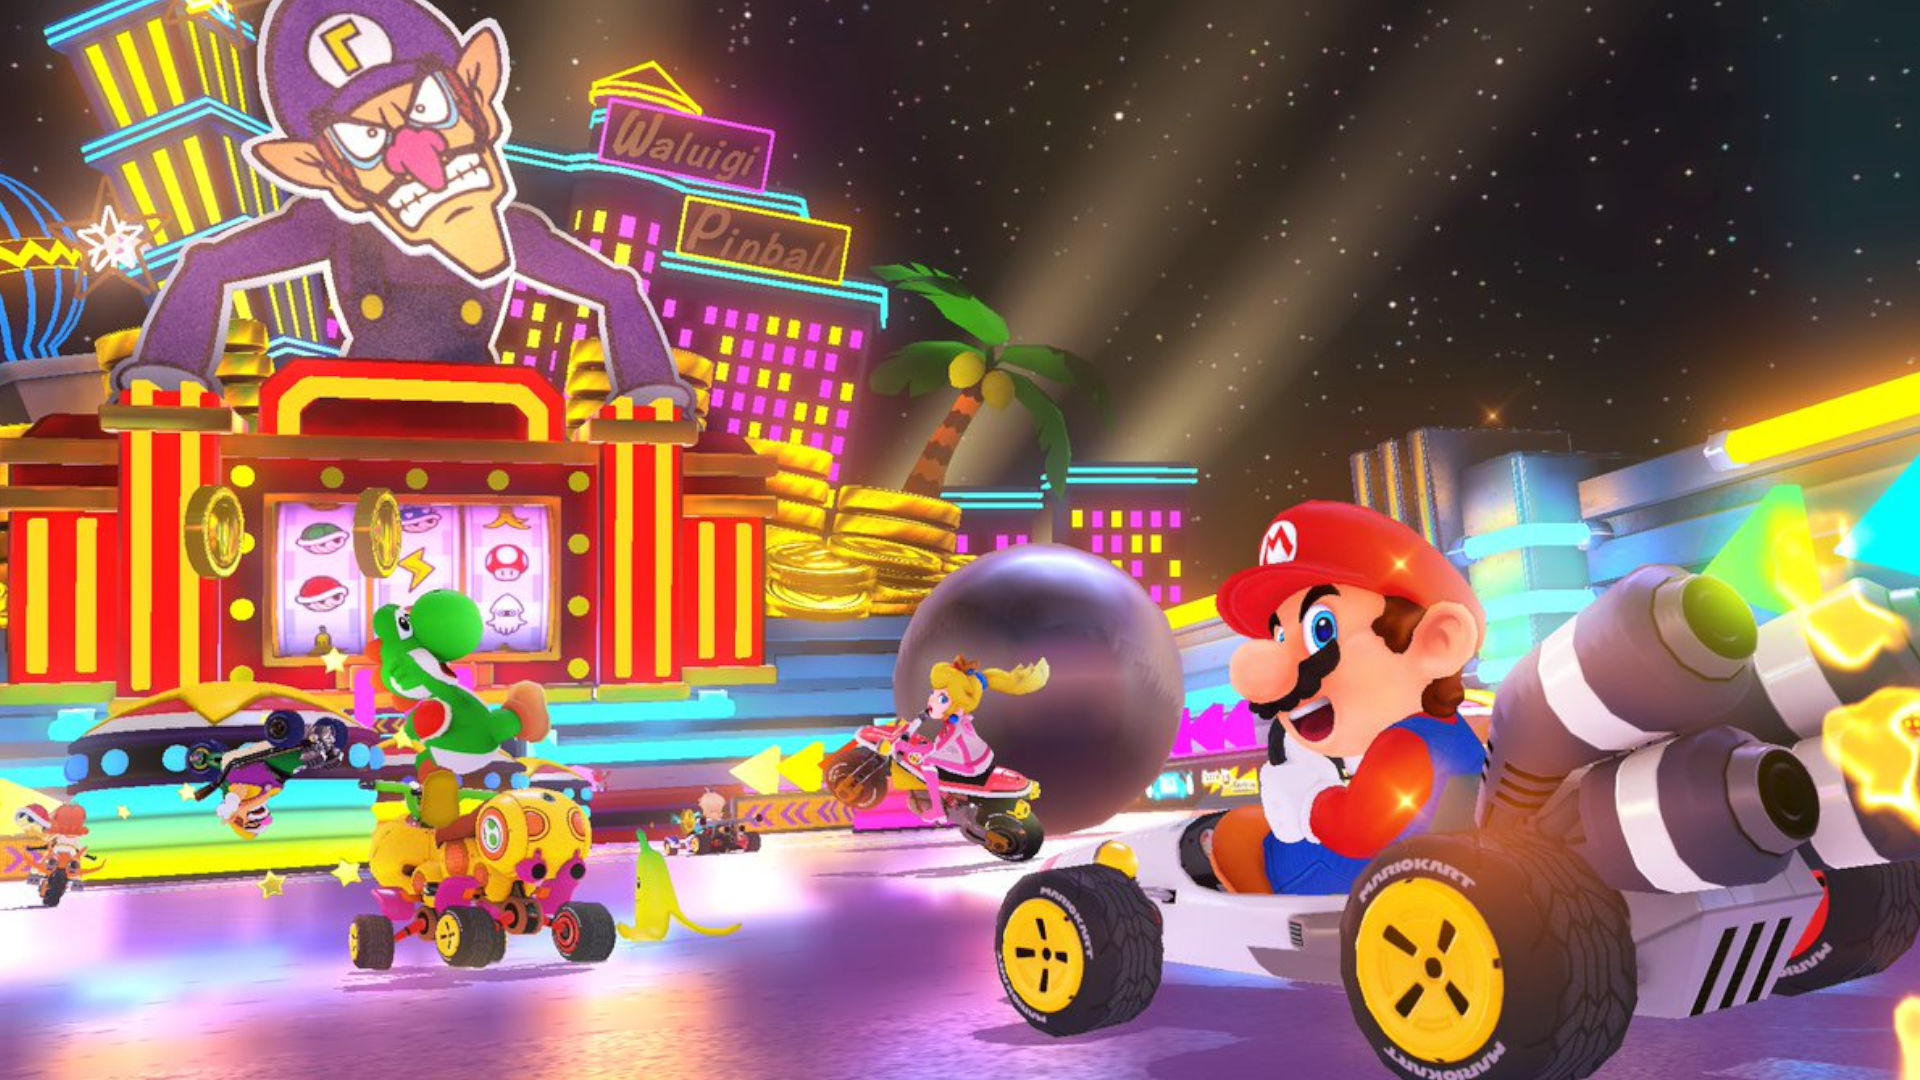 Mario Kart 8 Deluxe's latest track is an instant classic